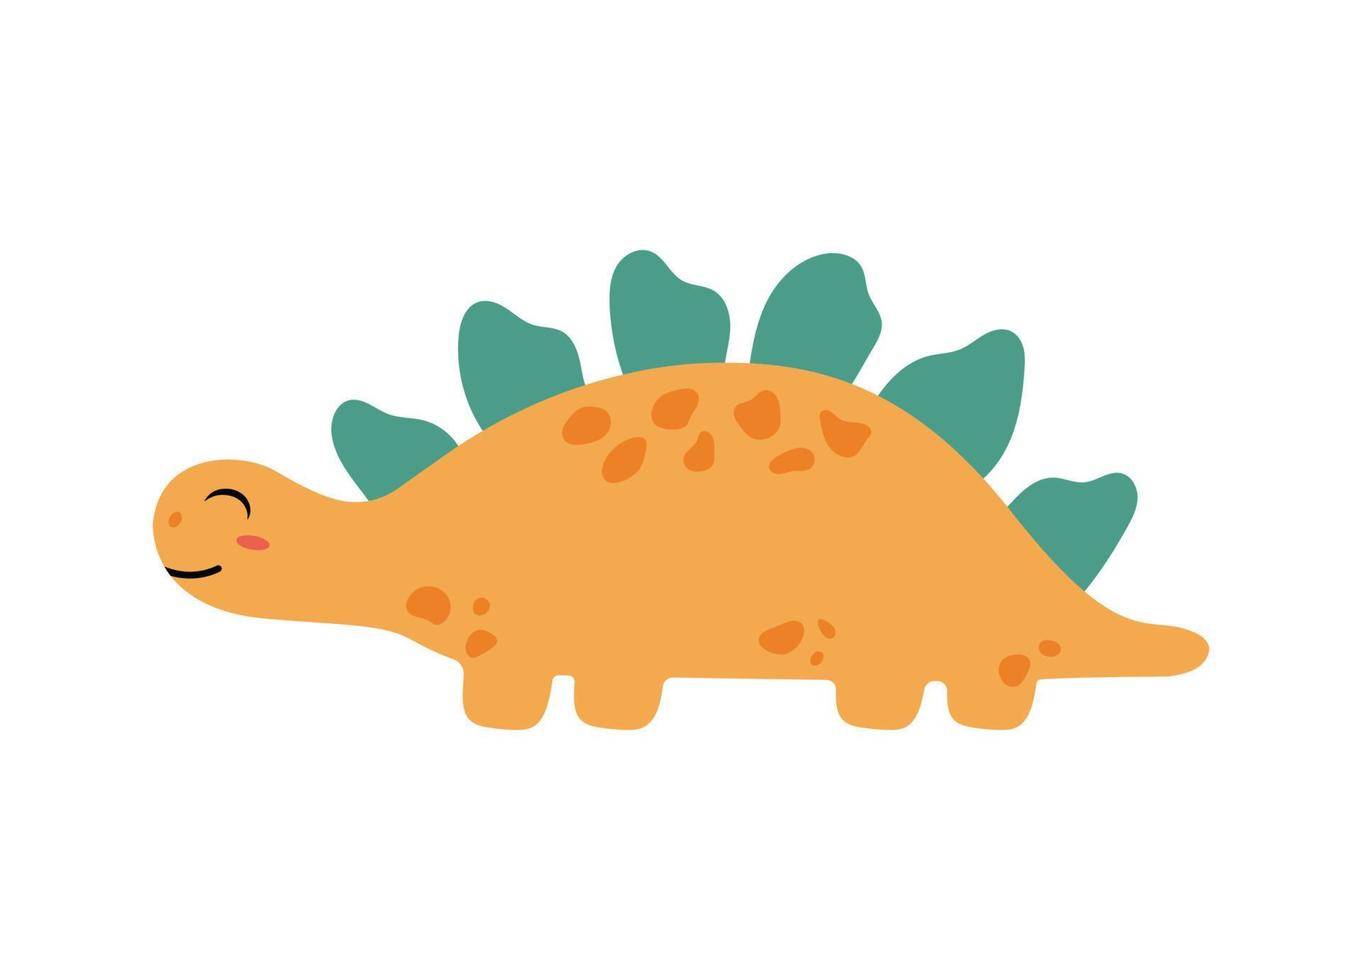 Cute orange dino. Design for children's clothing, print, poster, postcard, fabric. Hand drawn colored flat vector illustration isolated on white background.